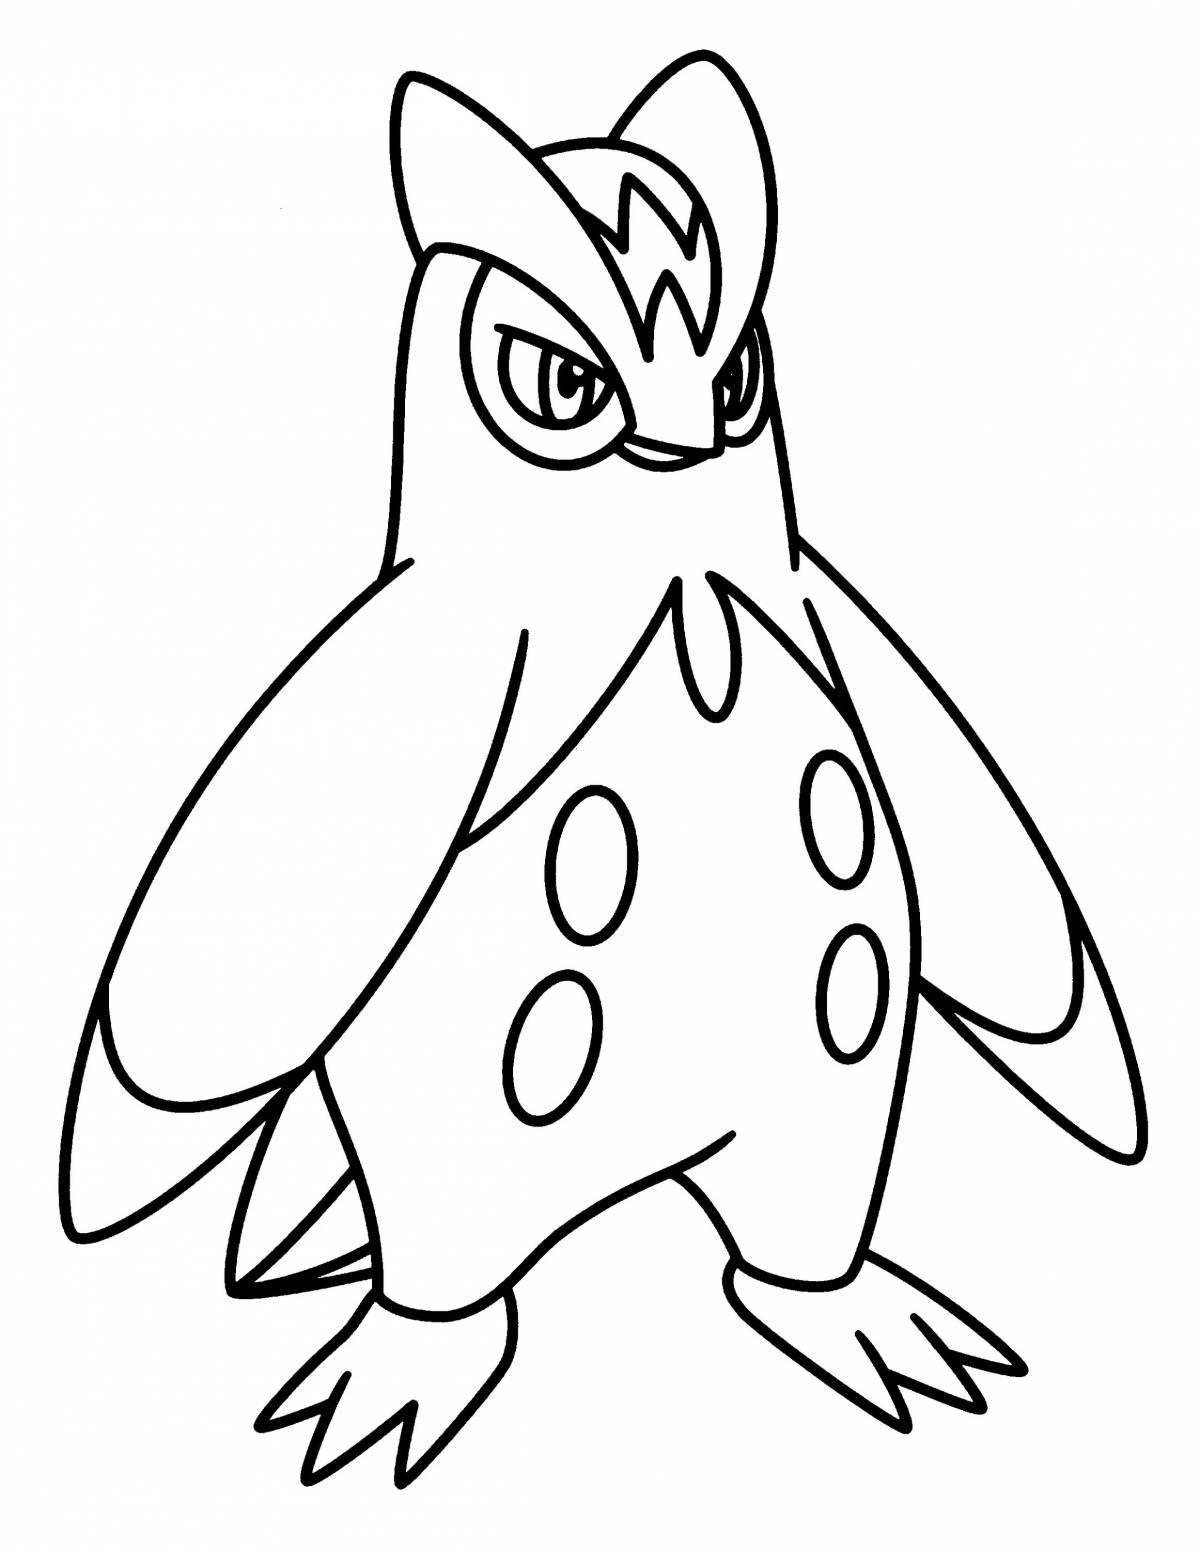 Colorful pokemon piplap coloring page